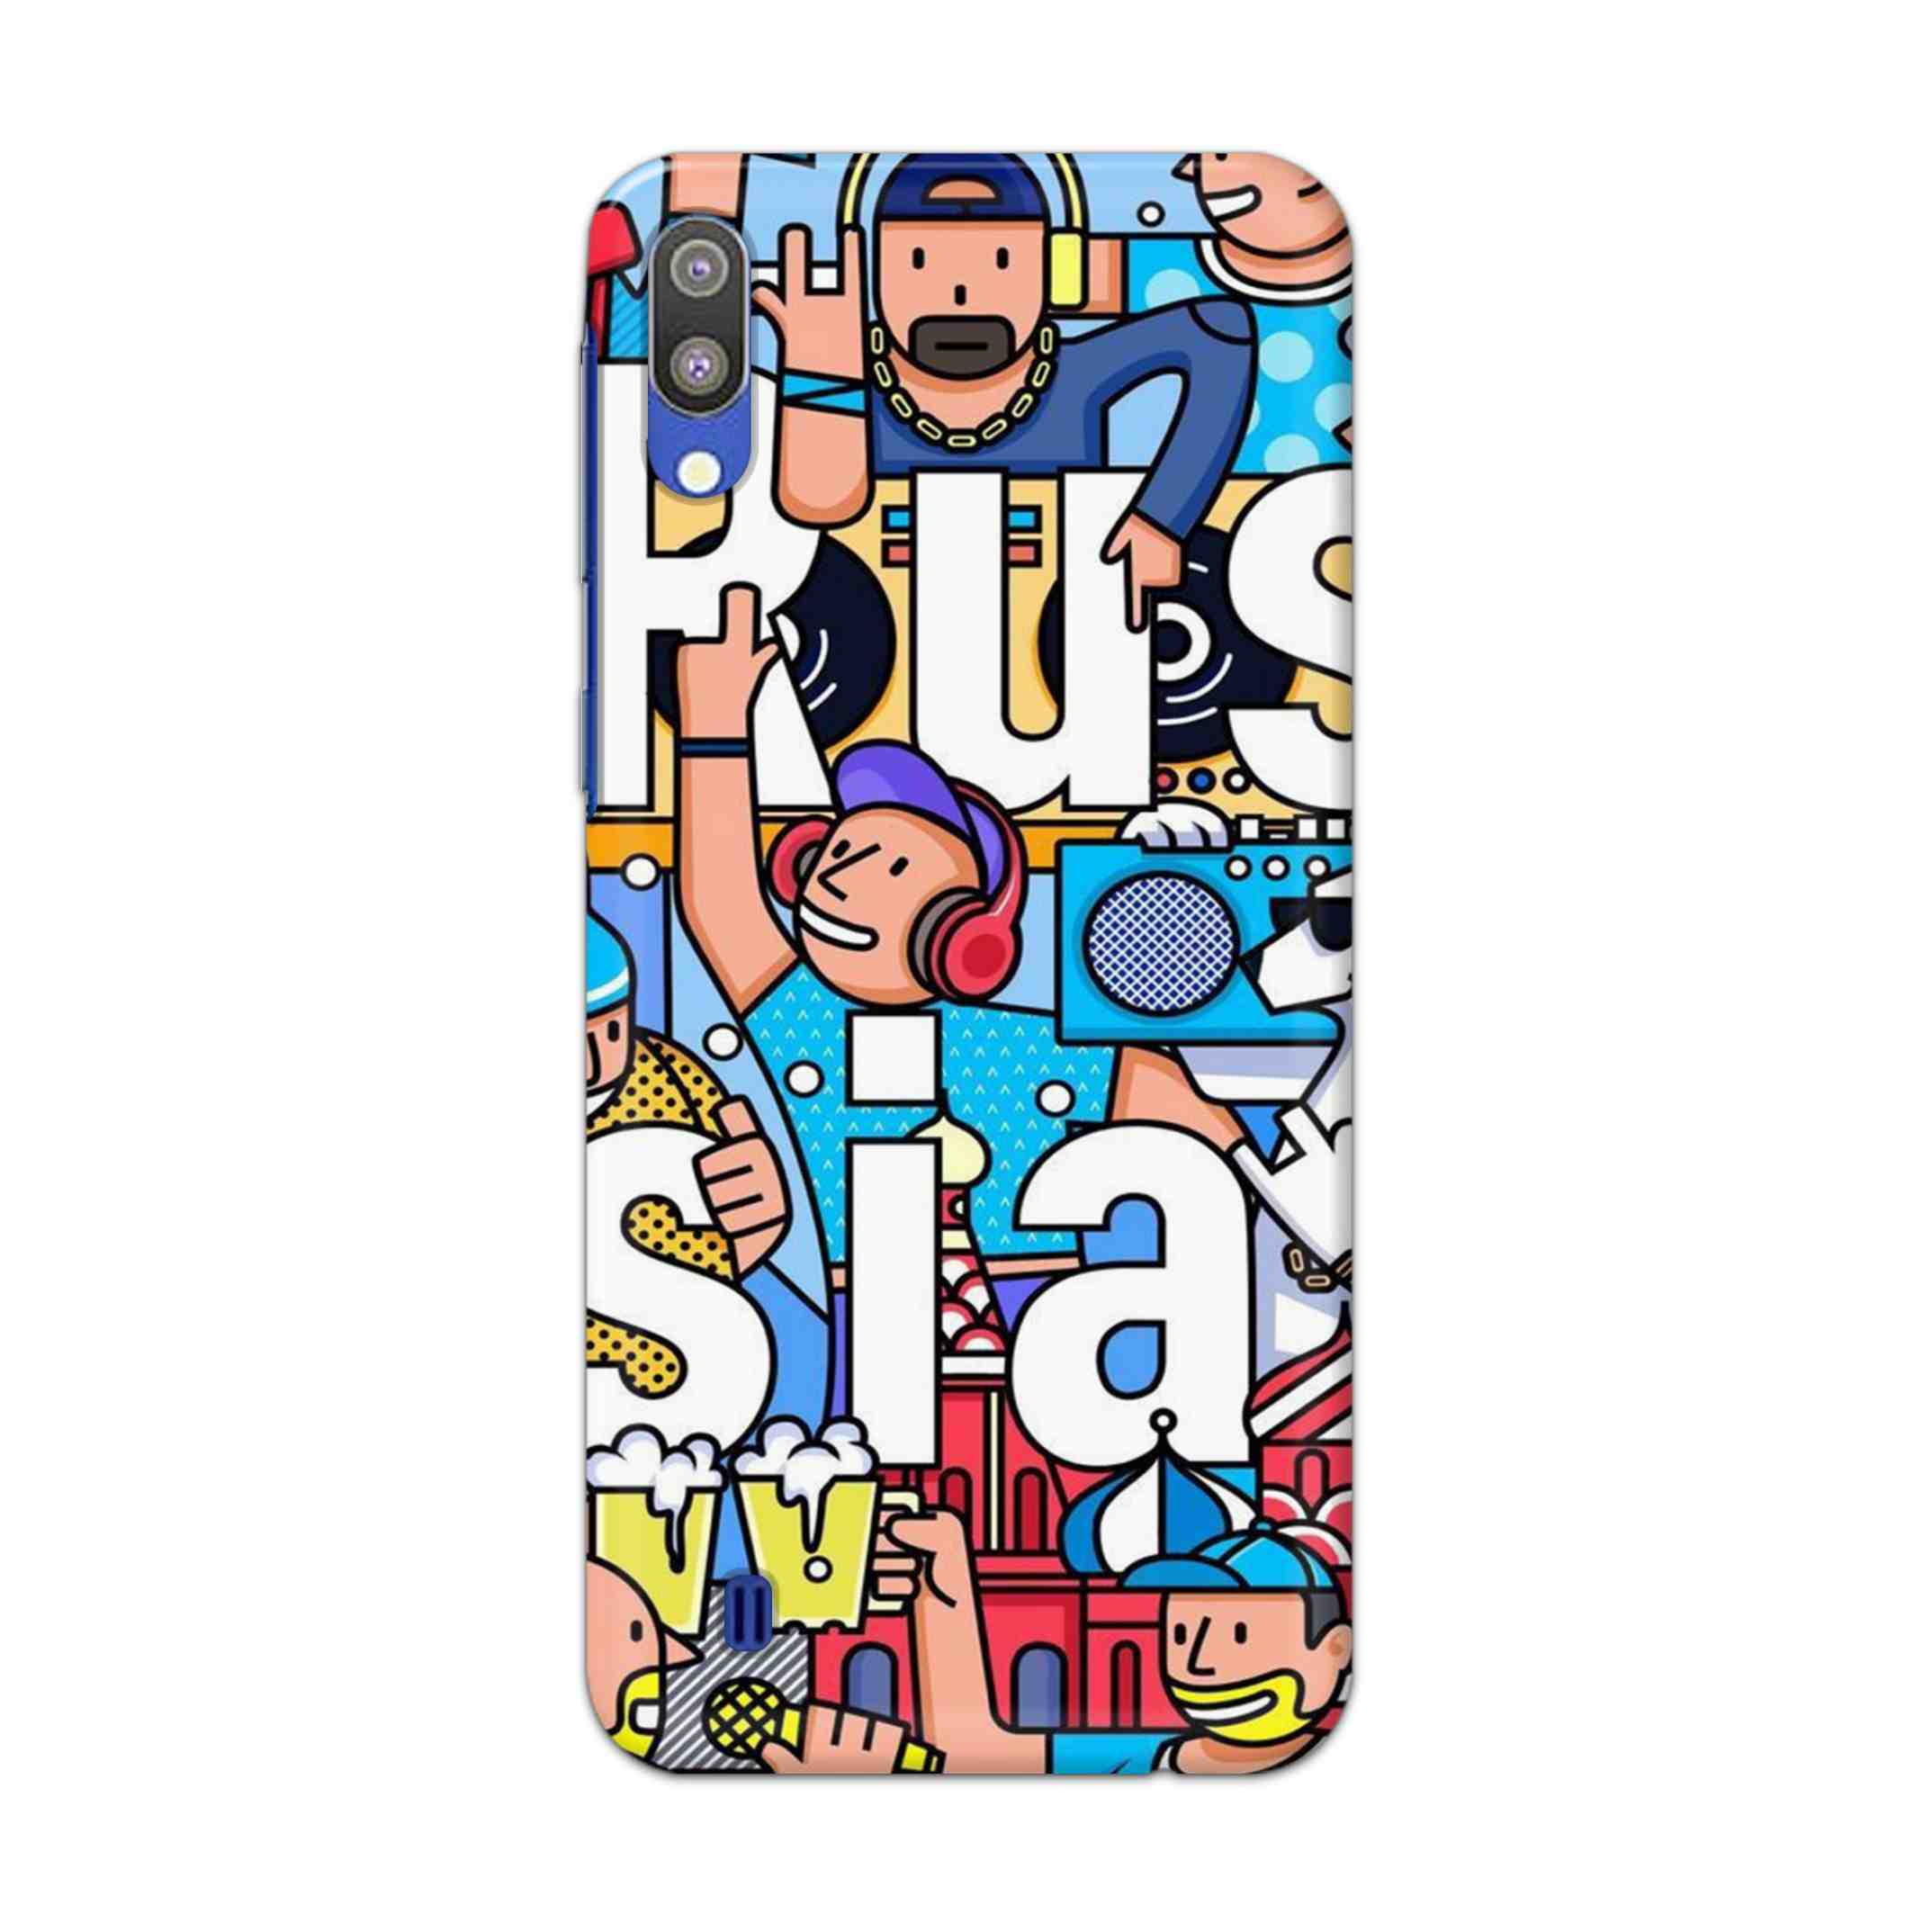 Buy Russia Hard Back Mobile Phone Case Cover For Samsung Galaxy M10 Online